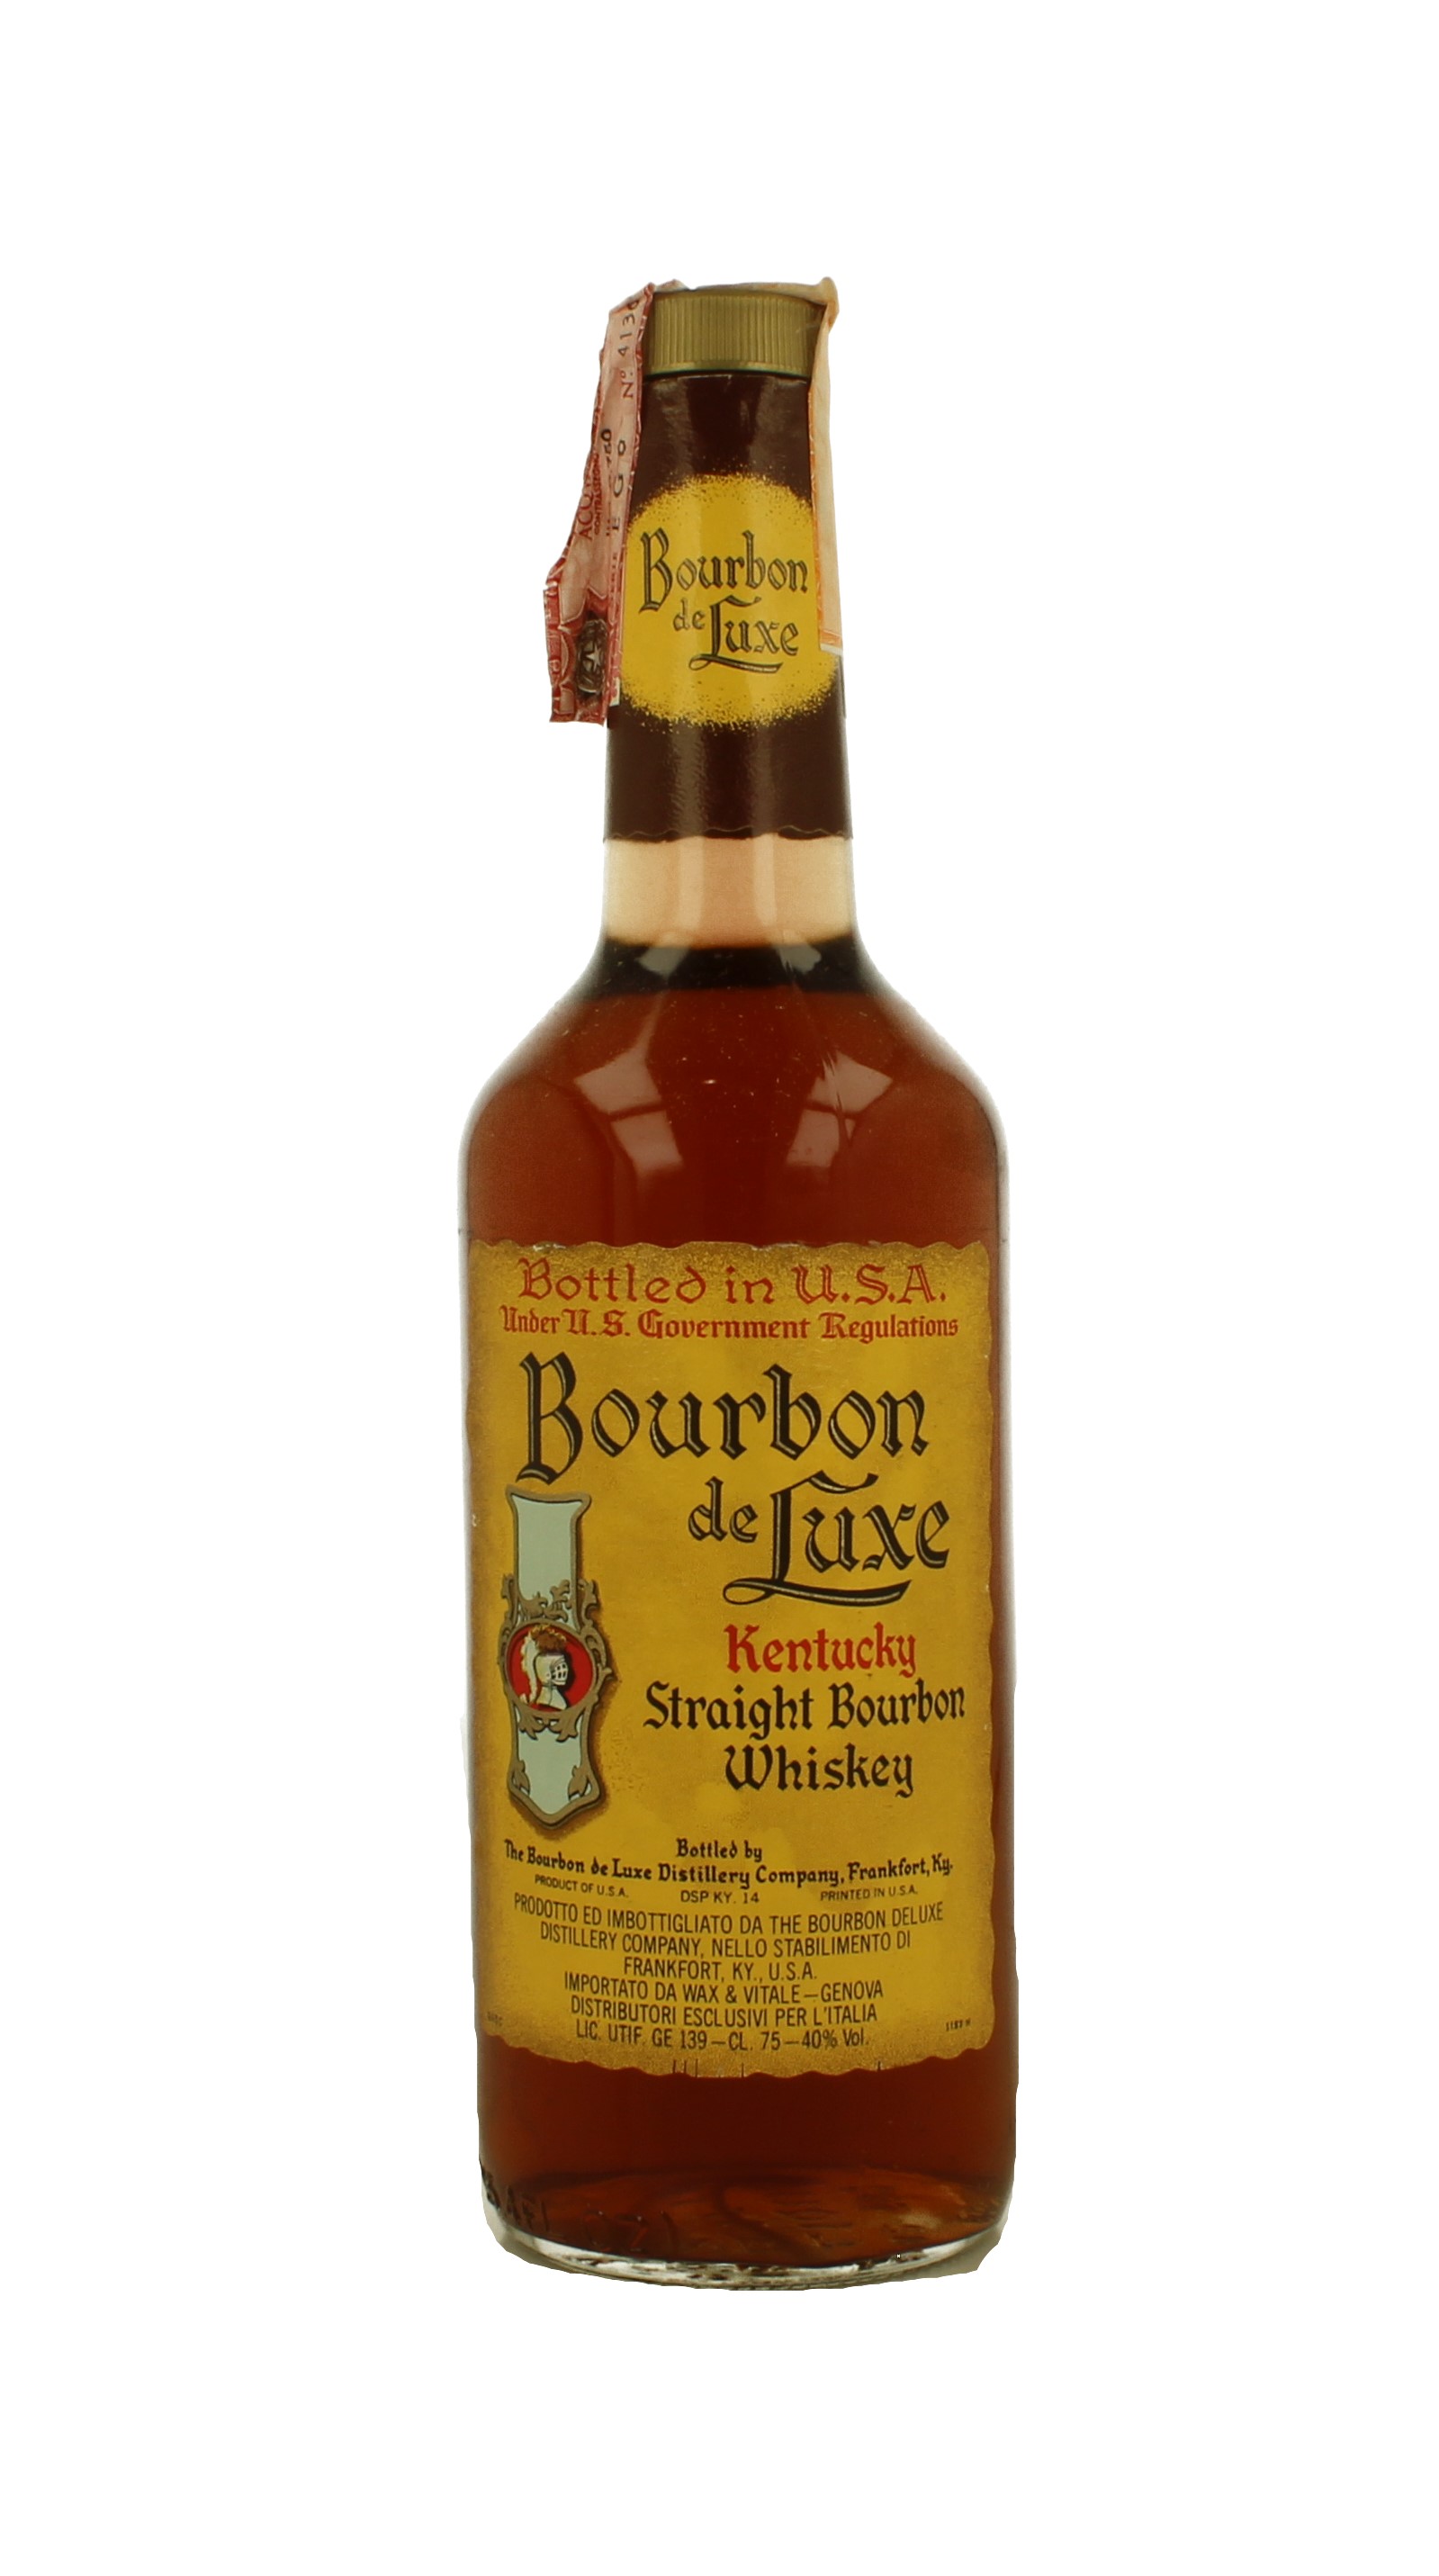 Bourbon De LUxe Kentucky Straight Bourbon Whiskey Bottled 1980 around 75cl  40% - Products - Whisky Antique, Whisky & Spirits